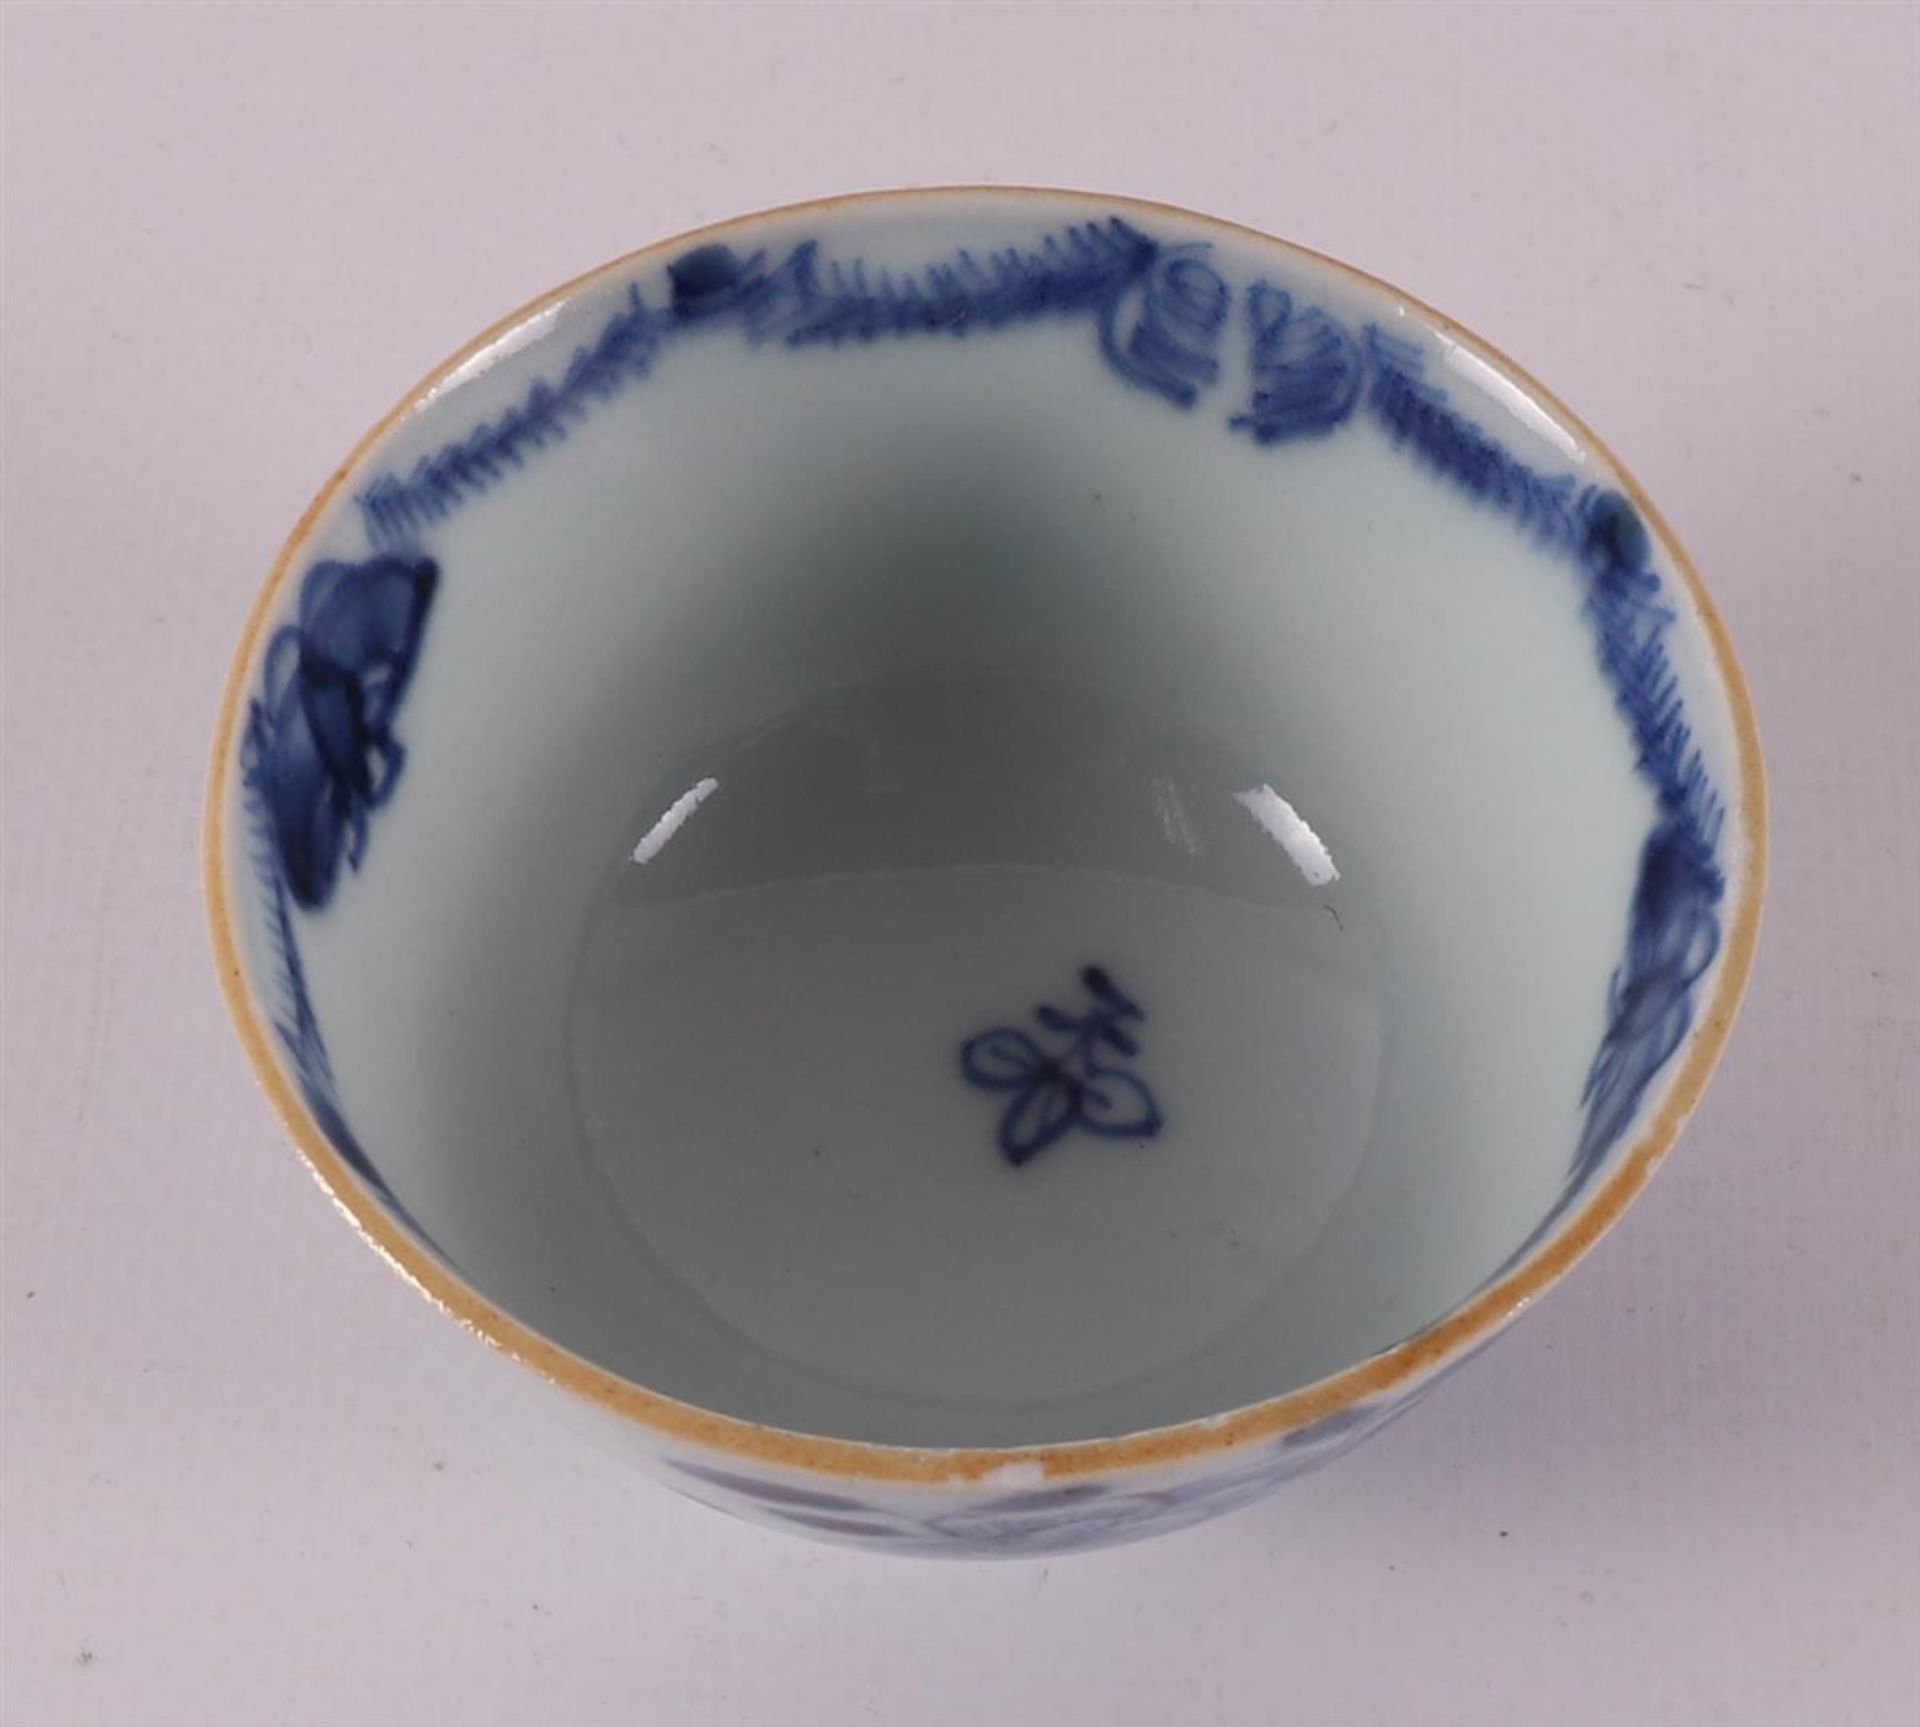 Six blue/white porcelain cups and saucers, China, Qianlong, 18th century. - Image 14 of 20